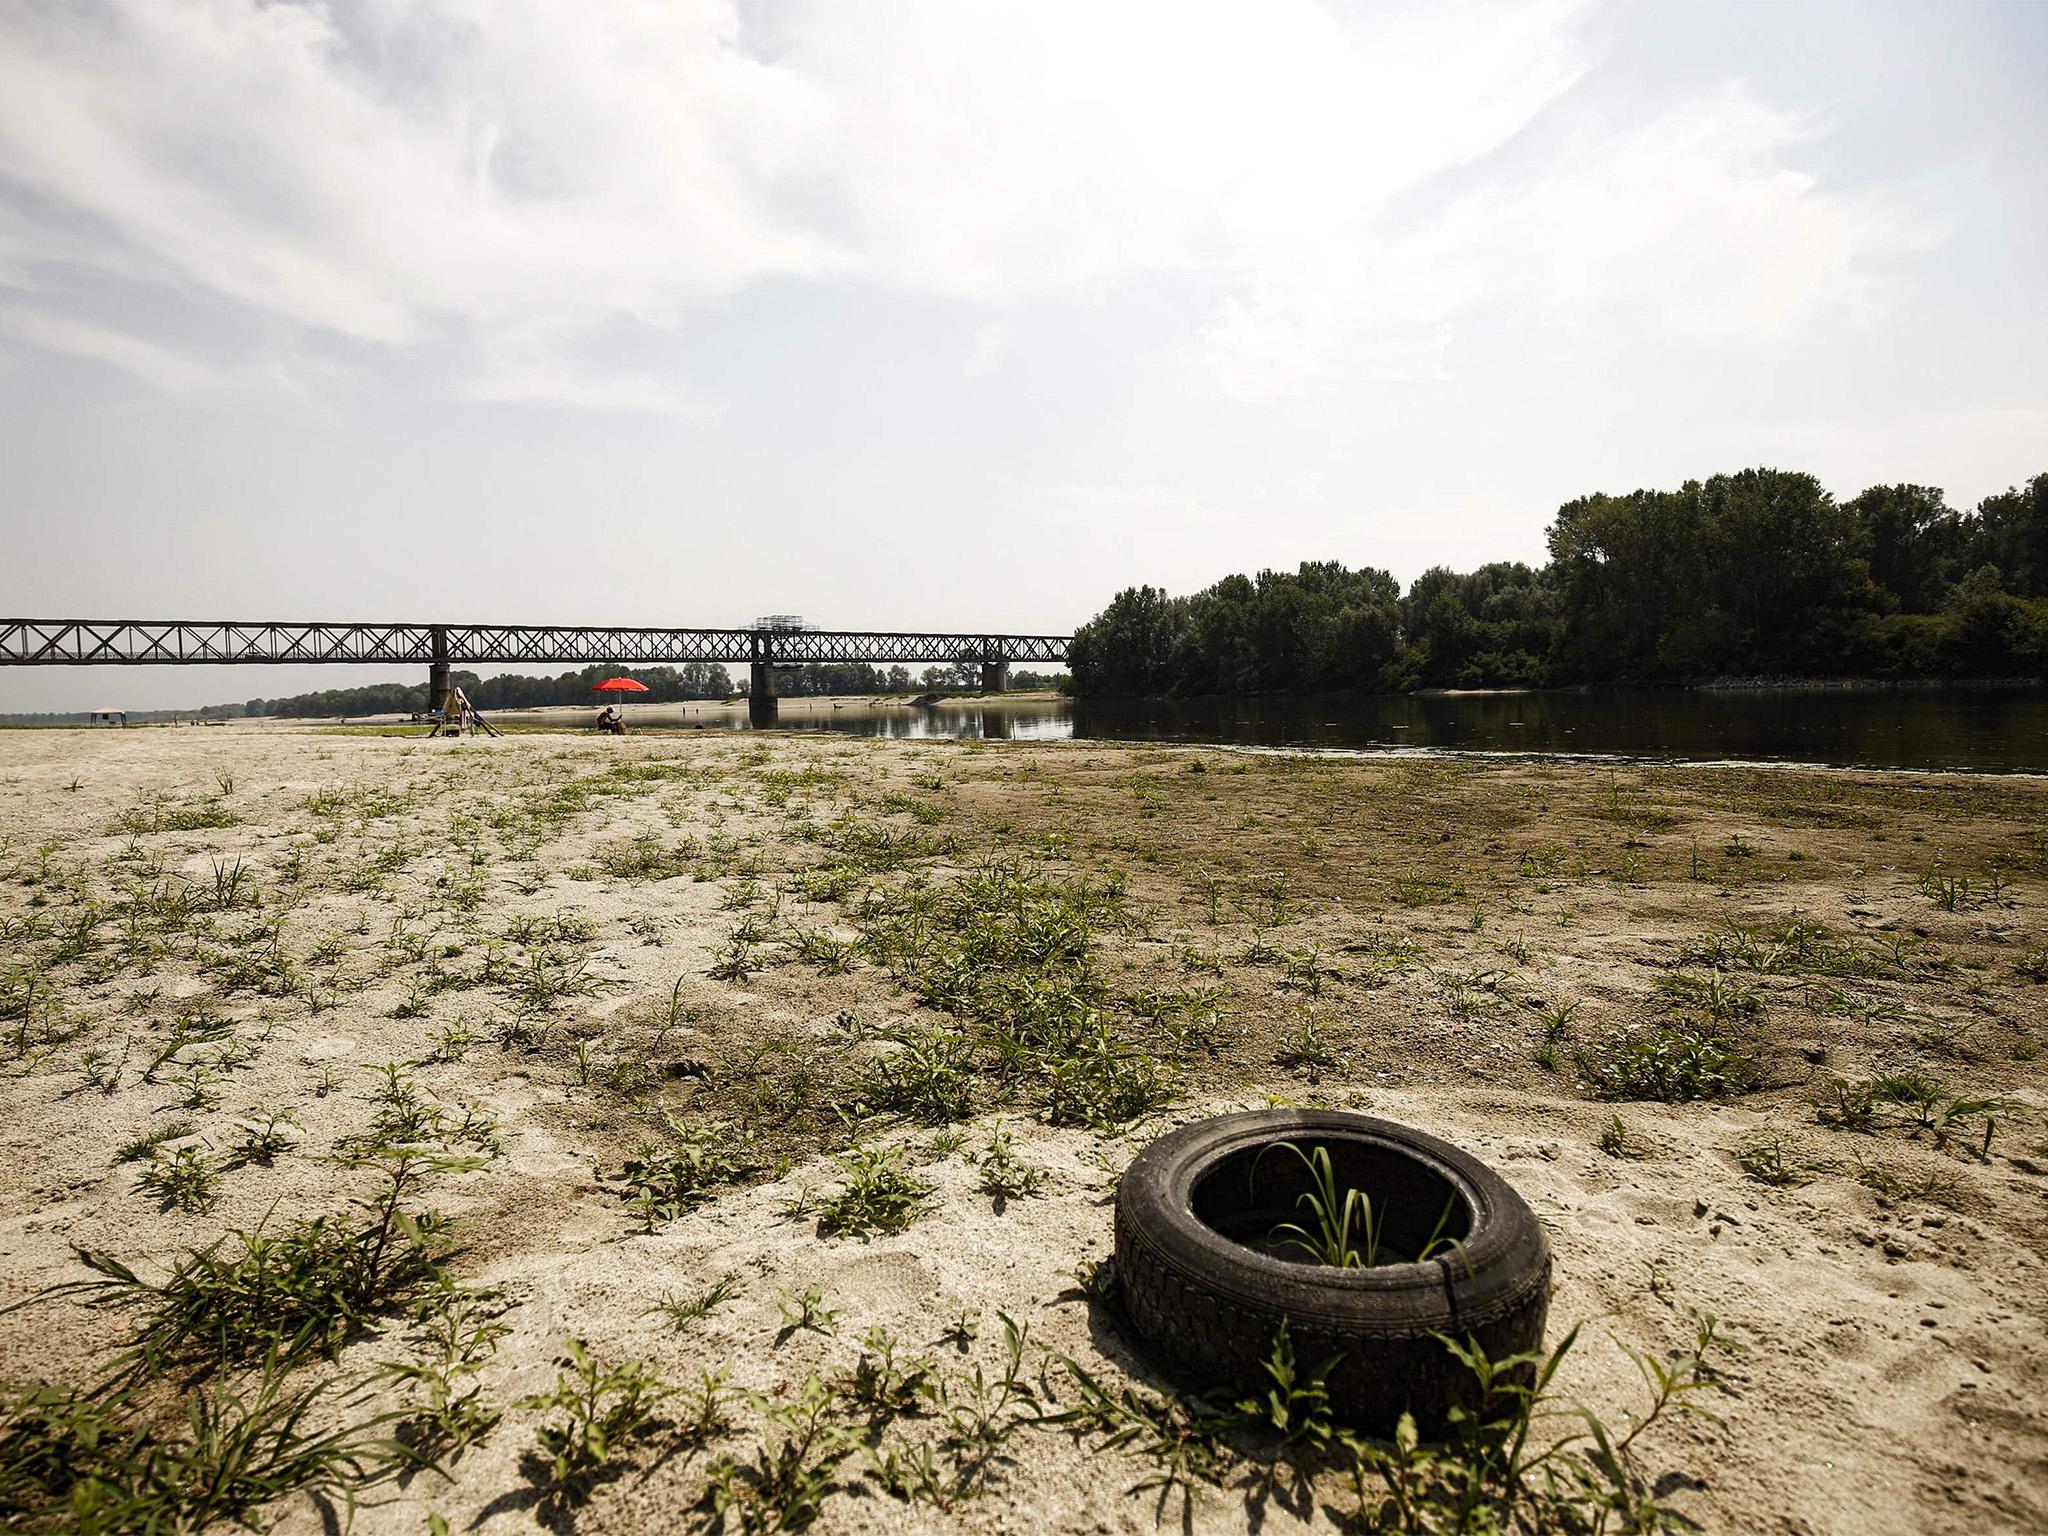 &#13;
A car tire lies on a dry sandbank near the Po River near the Ponte della Becca bridge in Linarolo, near Pavia, northern Italy, on August 1, 2017, after the country was affected by a heat wave and drought. &#13;